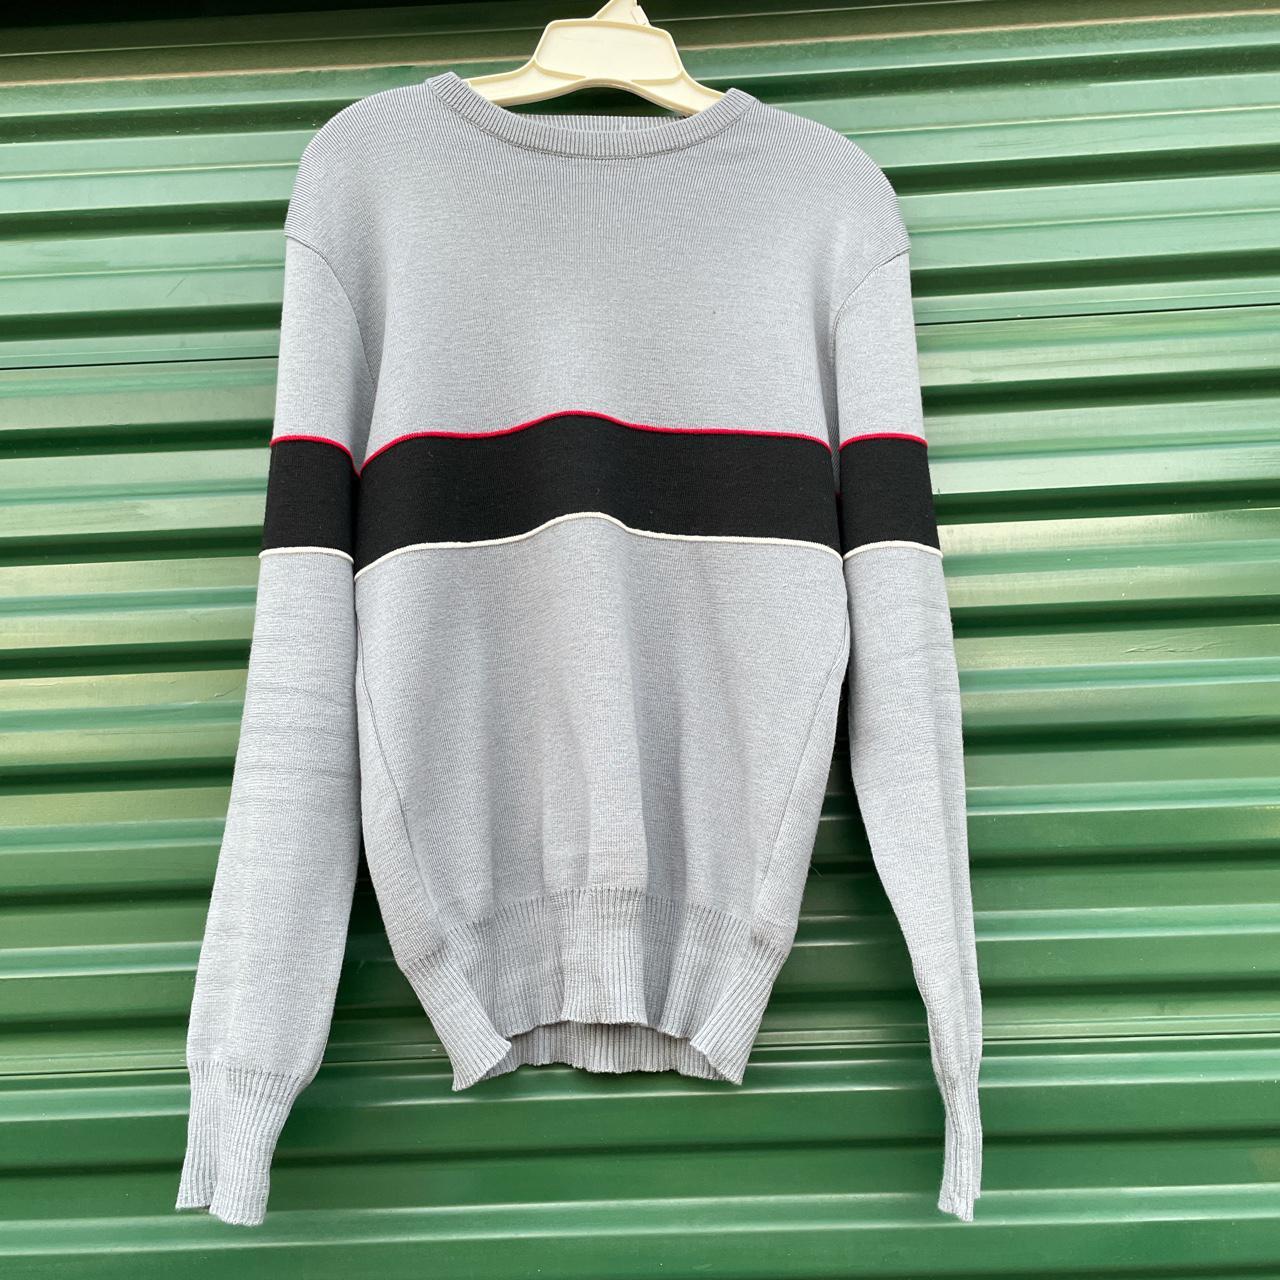 Product Image 1 - Vintage 80s Meister Sweater 🕺🏻

Size: